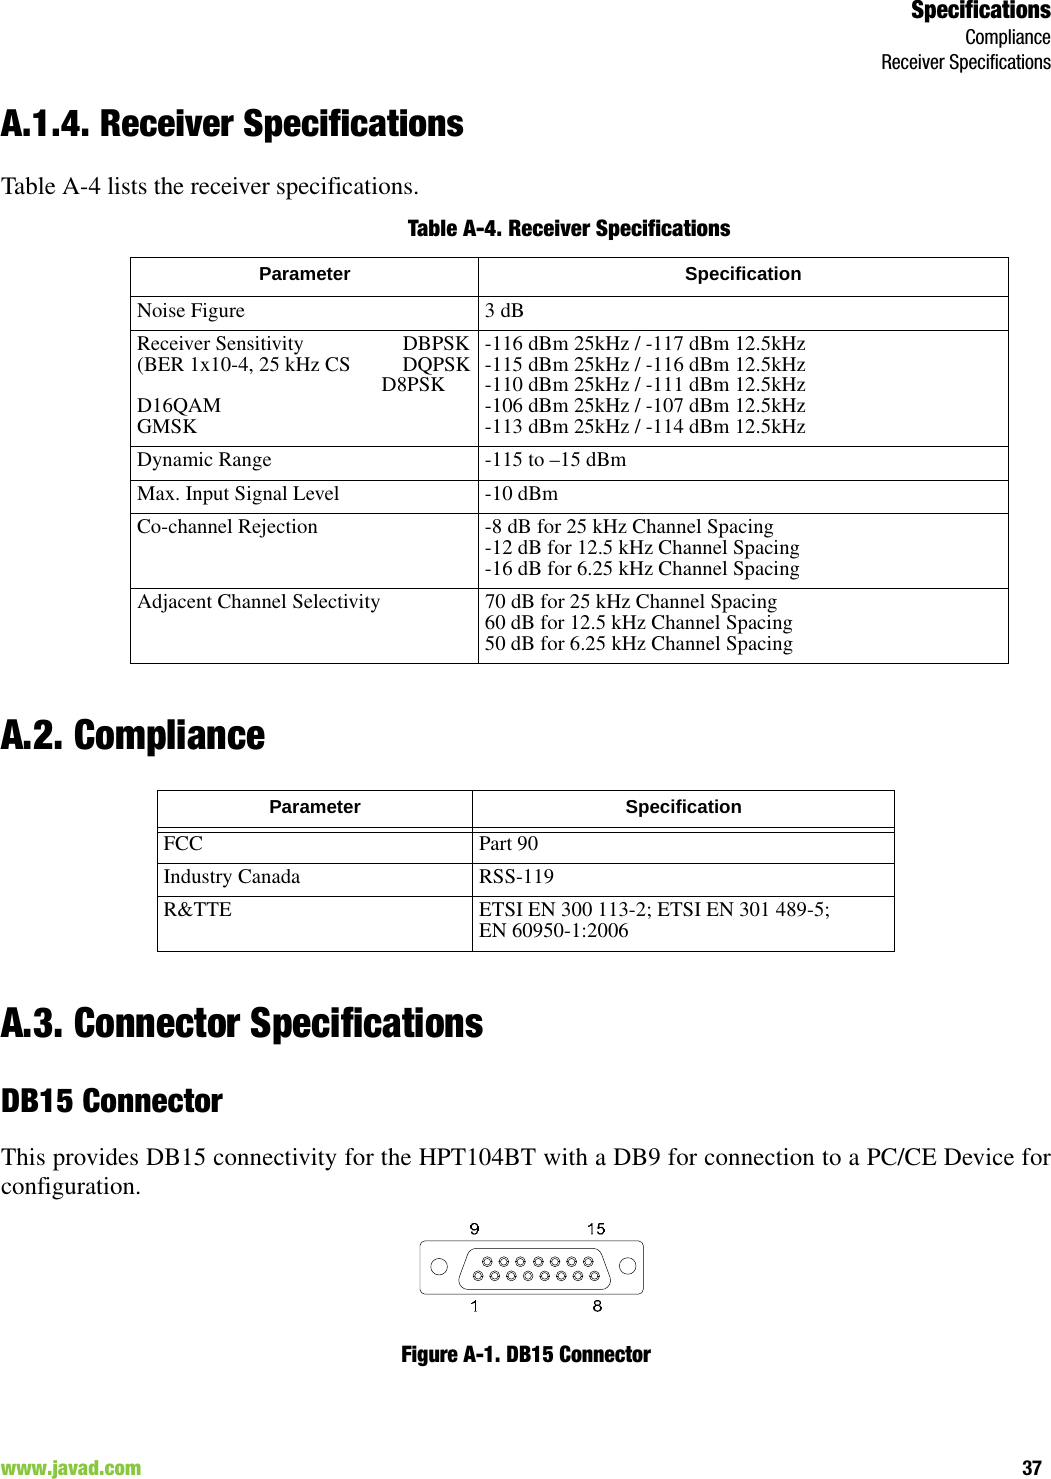 SpecificationsComplianceReceiver Specifications37www.javad.com                                                                                                                                                        A.1.4. Receiver SpecificationsTable A-4 lists the receiver specifications.Table A-4. Receiver SpecificationsA.2. ComplianceA.3. Connector SpecificationsDB15 ConnectorThis provides DB15 connectivity for the HPT104BT with a DB9 for connection to a PC/CE Device forconfiguration. Figure A-1. DB15 ConnectorParameter SpecificationNoise Figure 3 dBReceiver Sensitivity                   DBPSK(BER 1x10-4, 25 kHz CS          DQPSK                                               D8PSKD16QAMGMSK-116 dBm 25kHz / -117 dBm 12.5kHz-115 dBm 25kHz / -116 dBm 12.5kHz-110 dBm 25kHz / -111 dBm 12.5kHz-106 dBm 25kHz / -107 dBm 12.5kHz-113 dBm 25kHz / -114 dBm 12.5kHzDynamic Range -115 to –15 dBmMax. Input Signal Level -10 dBmCo-channel Rejection -8 dB for 25 kHz Channel Spacing-12 dB for 12.5 kHz Channel Spacing-16 dB for 6.25 kHz Channel SpacingAdjacent Channel Selectivity 70 dB for 25 kHz Channel Spacing60 dB for 12.5 kHz Channel Spacing50 dB for 6.25 kHz Channel SpacingParameter SpecificationFCC Part 90 Industry Canada RSS-119R&amp;TTE ETSI EN 300 113-2; ETSI EN 301 489-5; EN 60950-1:2006